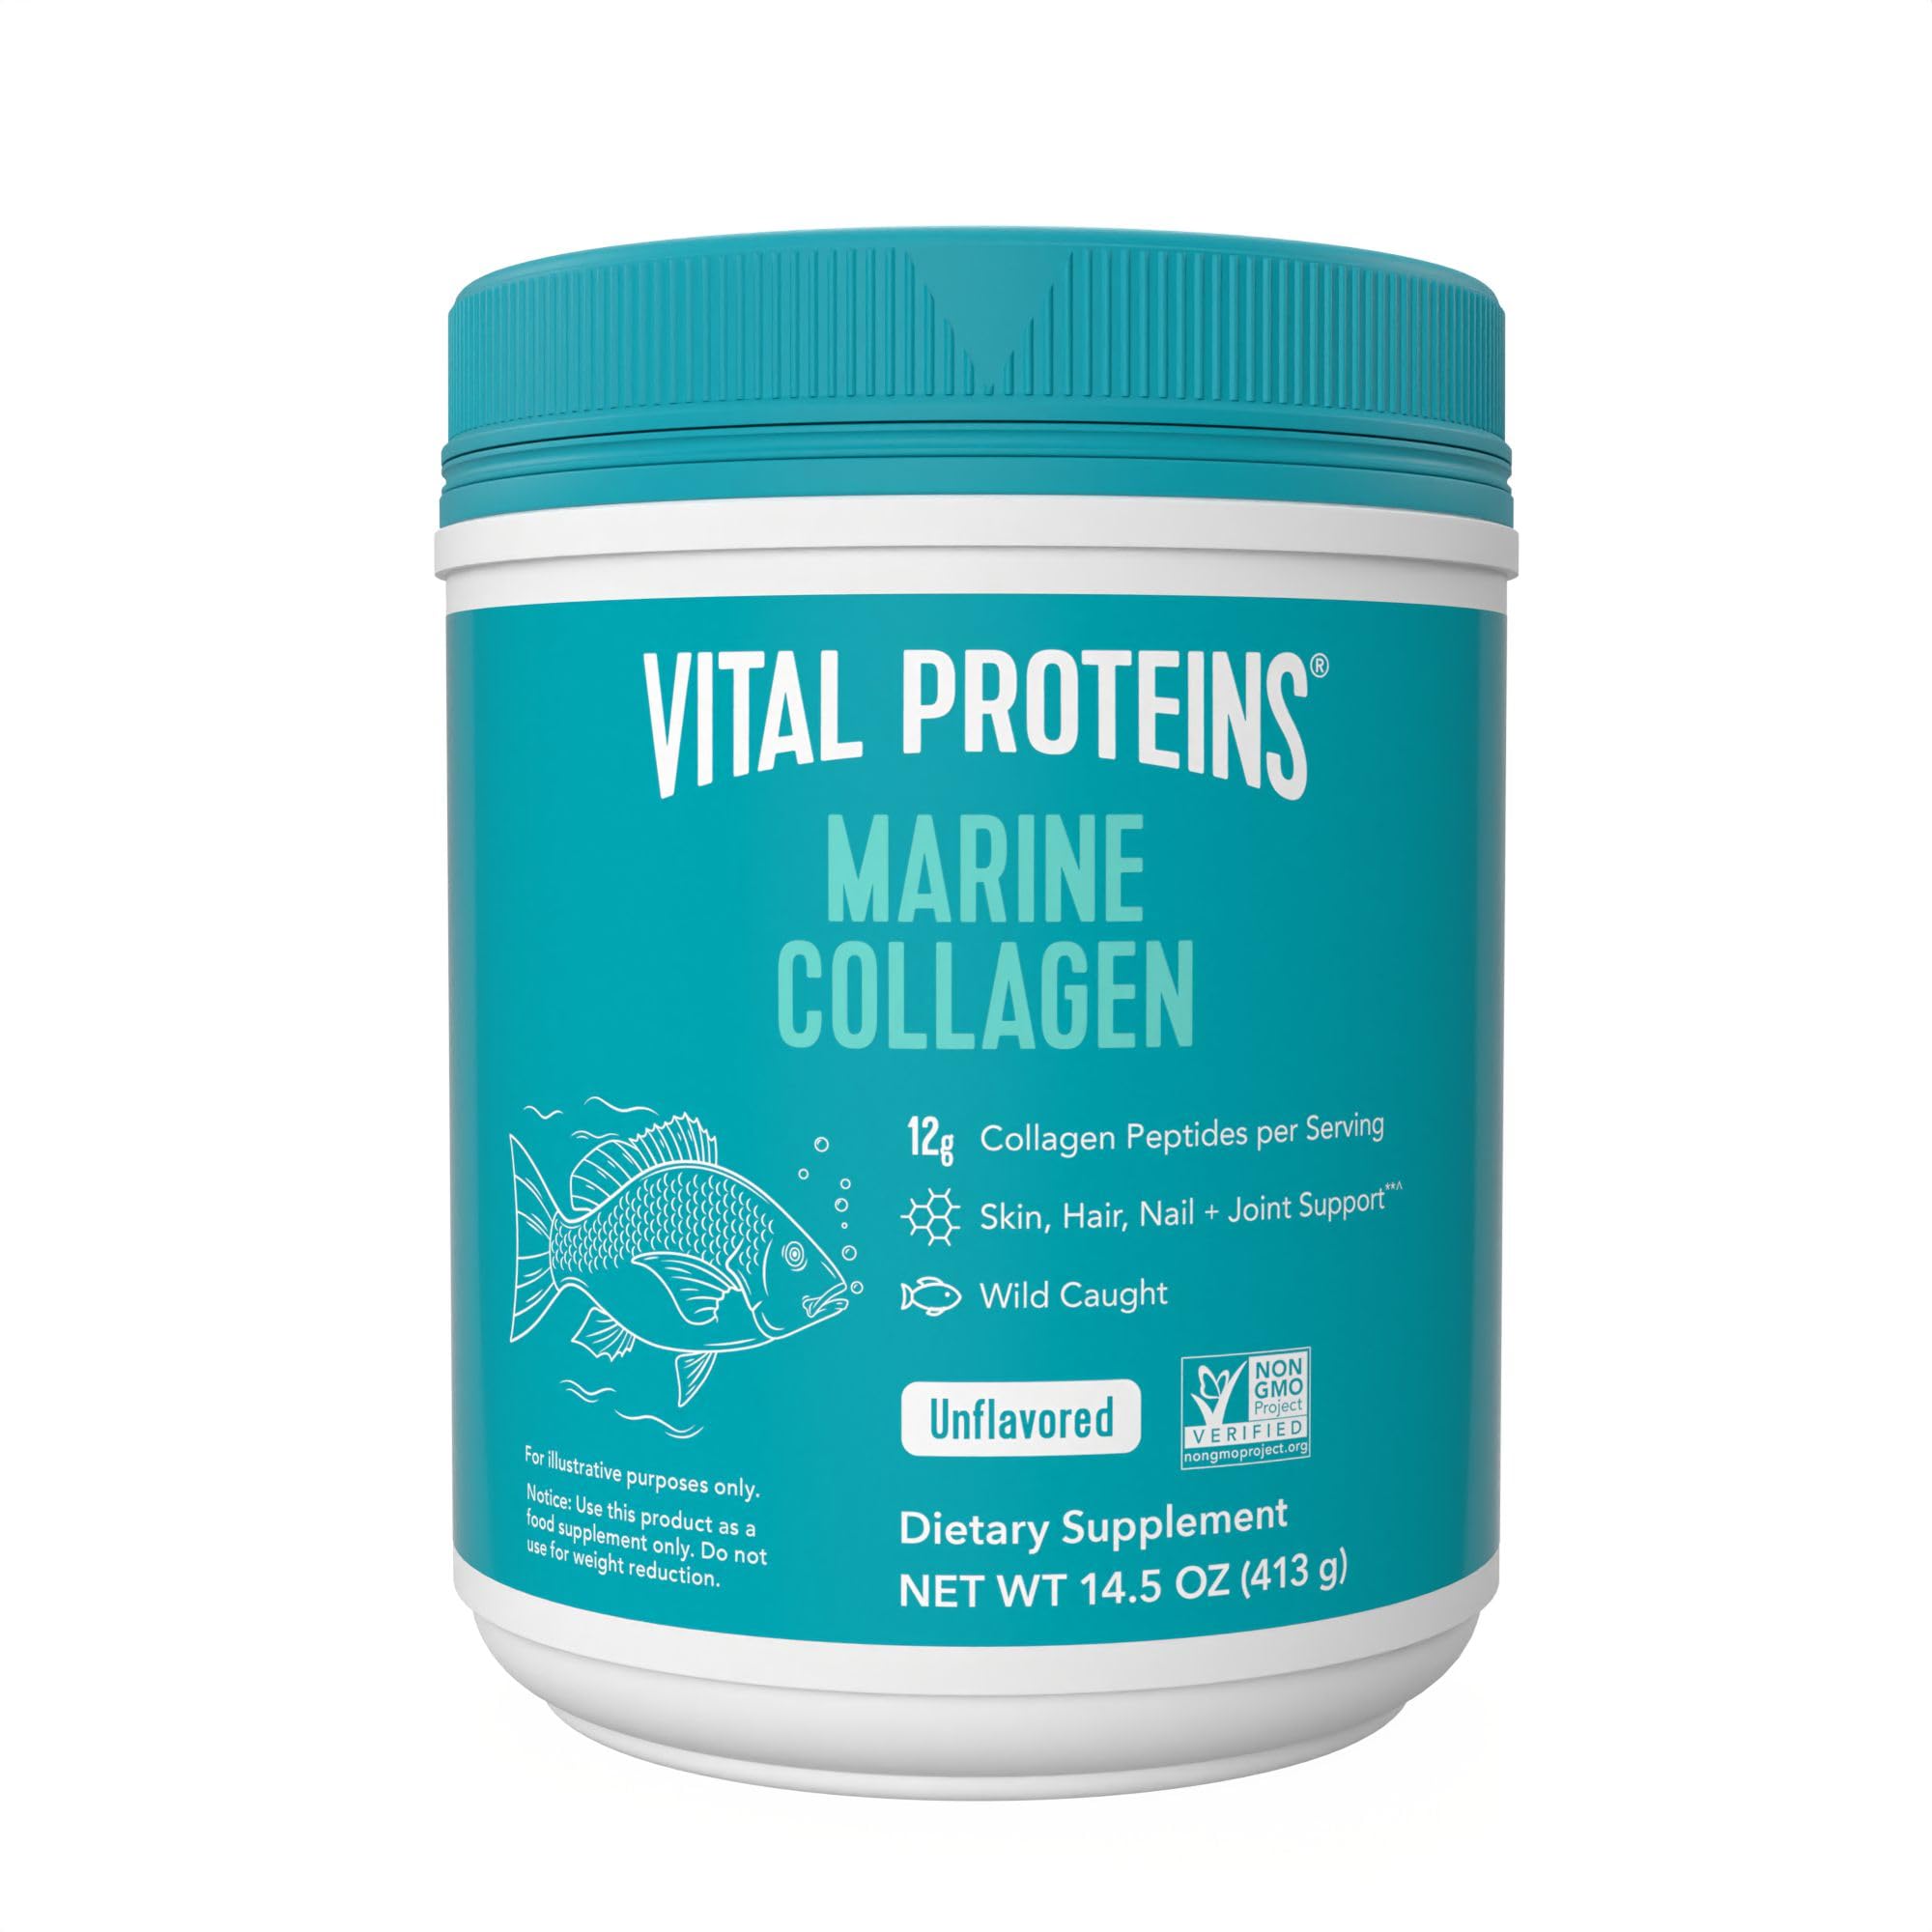 Vital Proteins Marine Collagen Peptides Powder Supplement for Skin Hair Nail Joint - Hydrolyzed Collagen - 12g per Serving - 14.5oz Canister